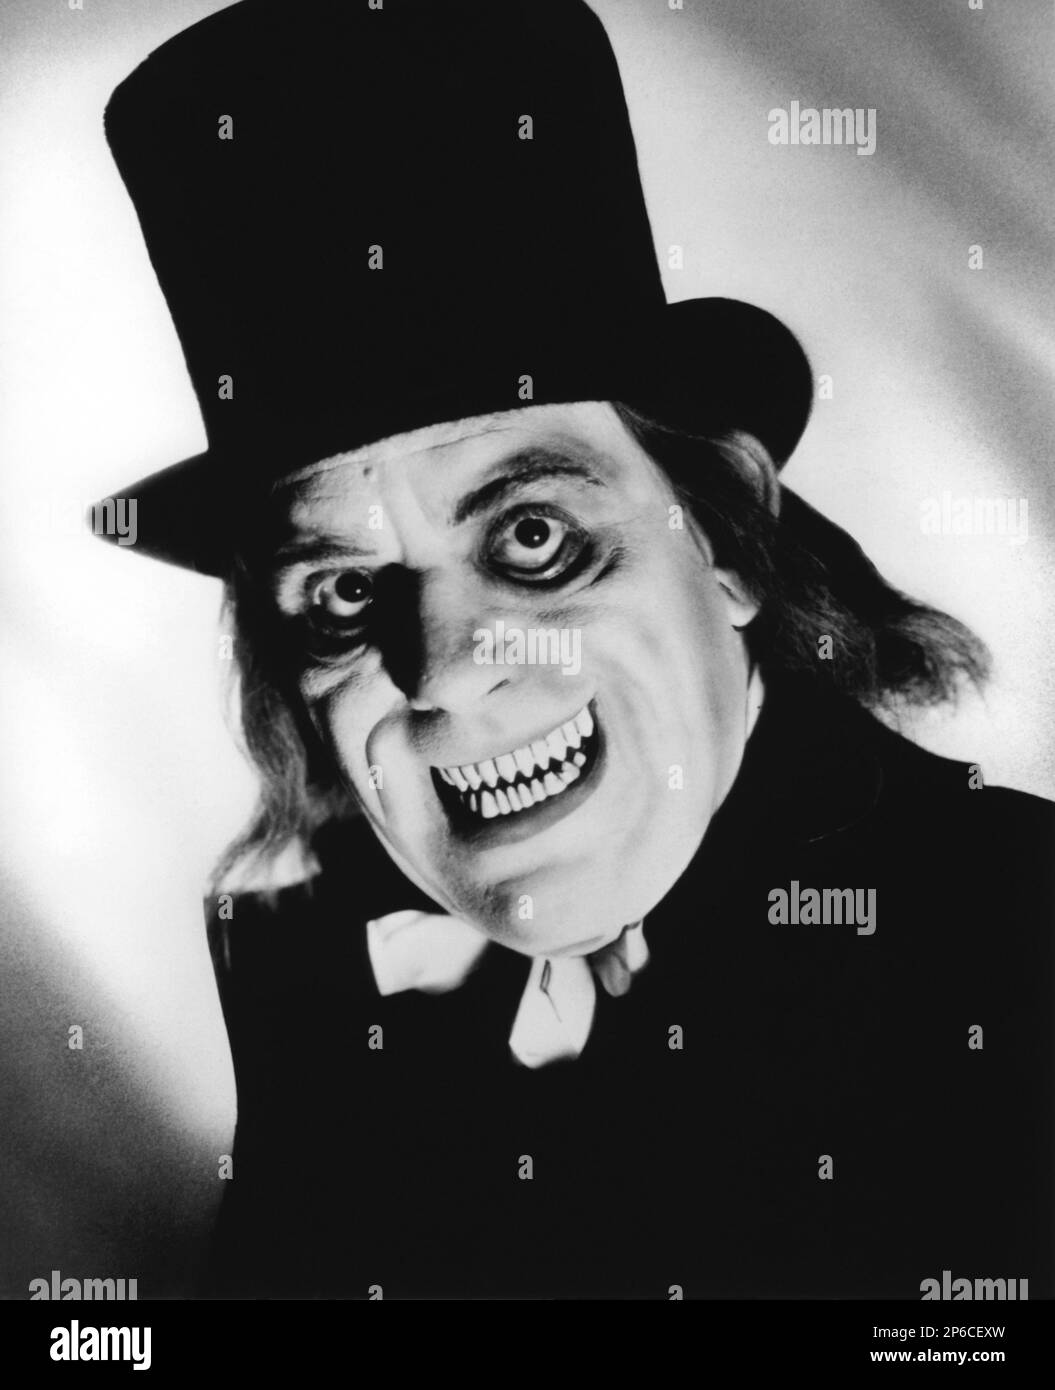 1927 , USA :  The movie actor LON CHANEY Senior  ( 1883 - 1930 ) in LONDON AFTER MIDNIGHT ( Il fantasma del castello ) by TOD BROWNING . - CINEMA MUTO - SILENT MOVIE - hat - top-hat -  cappello  a cilindro - triller   - horror  - mostro - monster ----  Archivio GBB Stock Photo